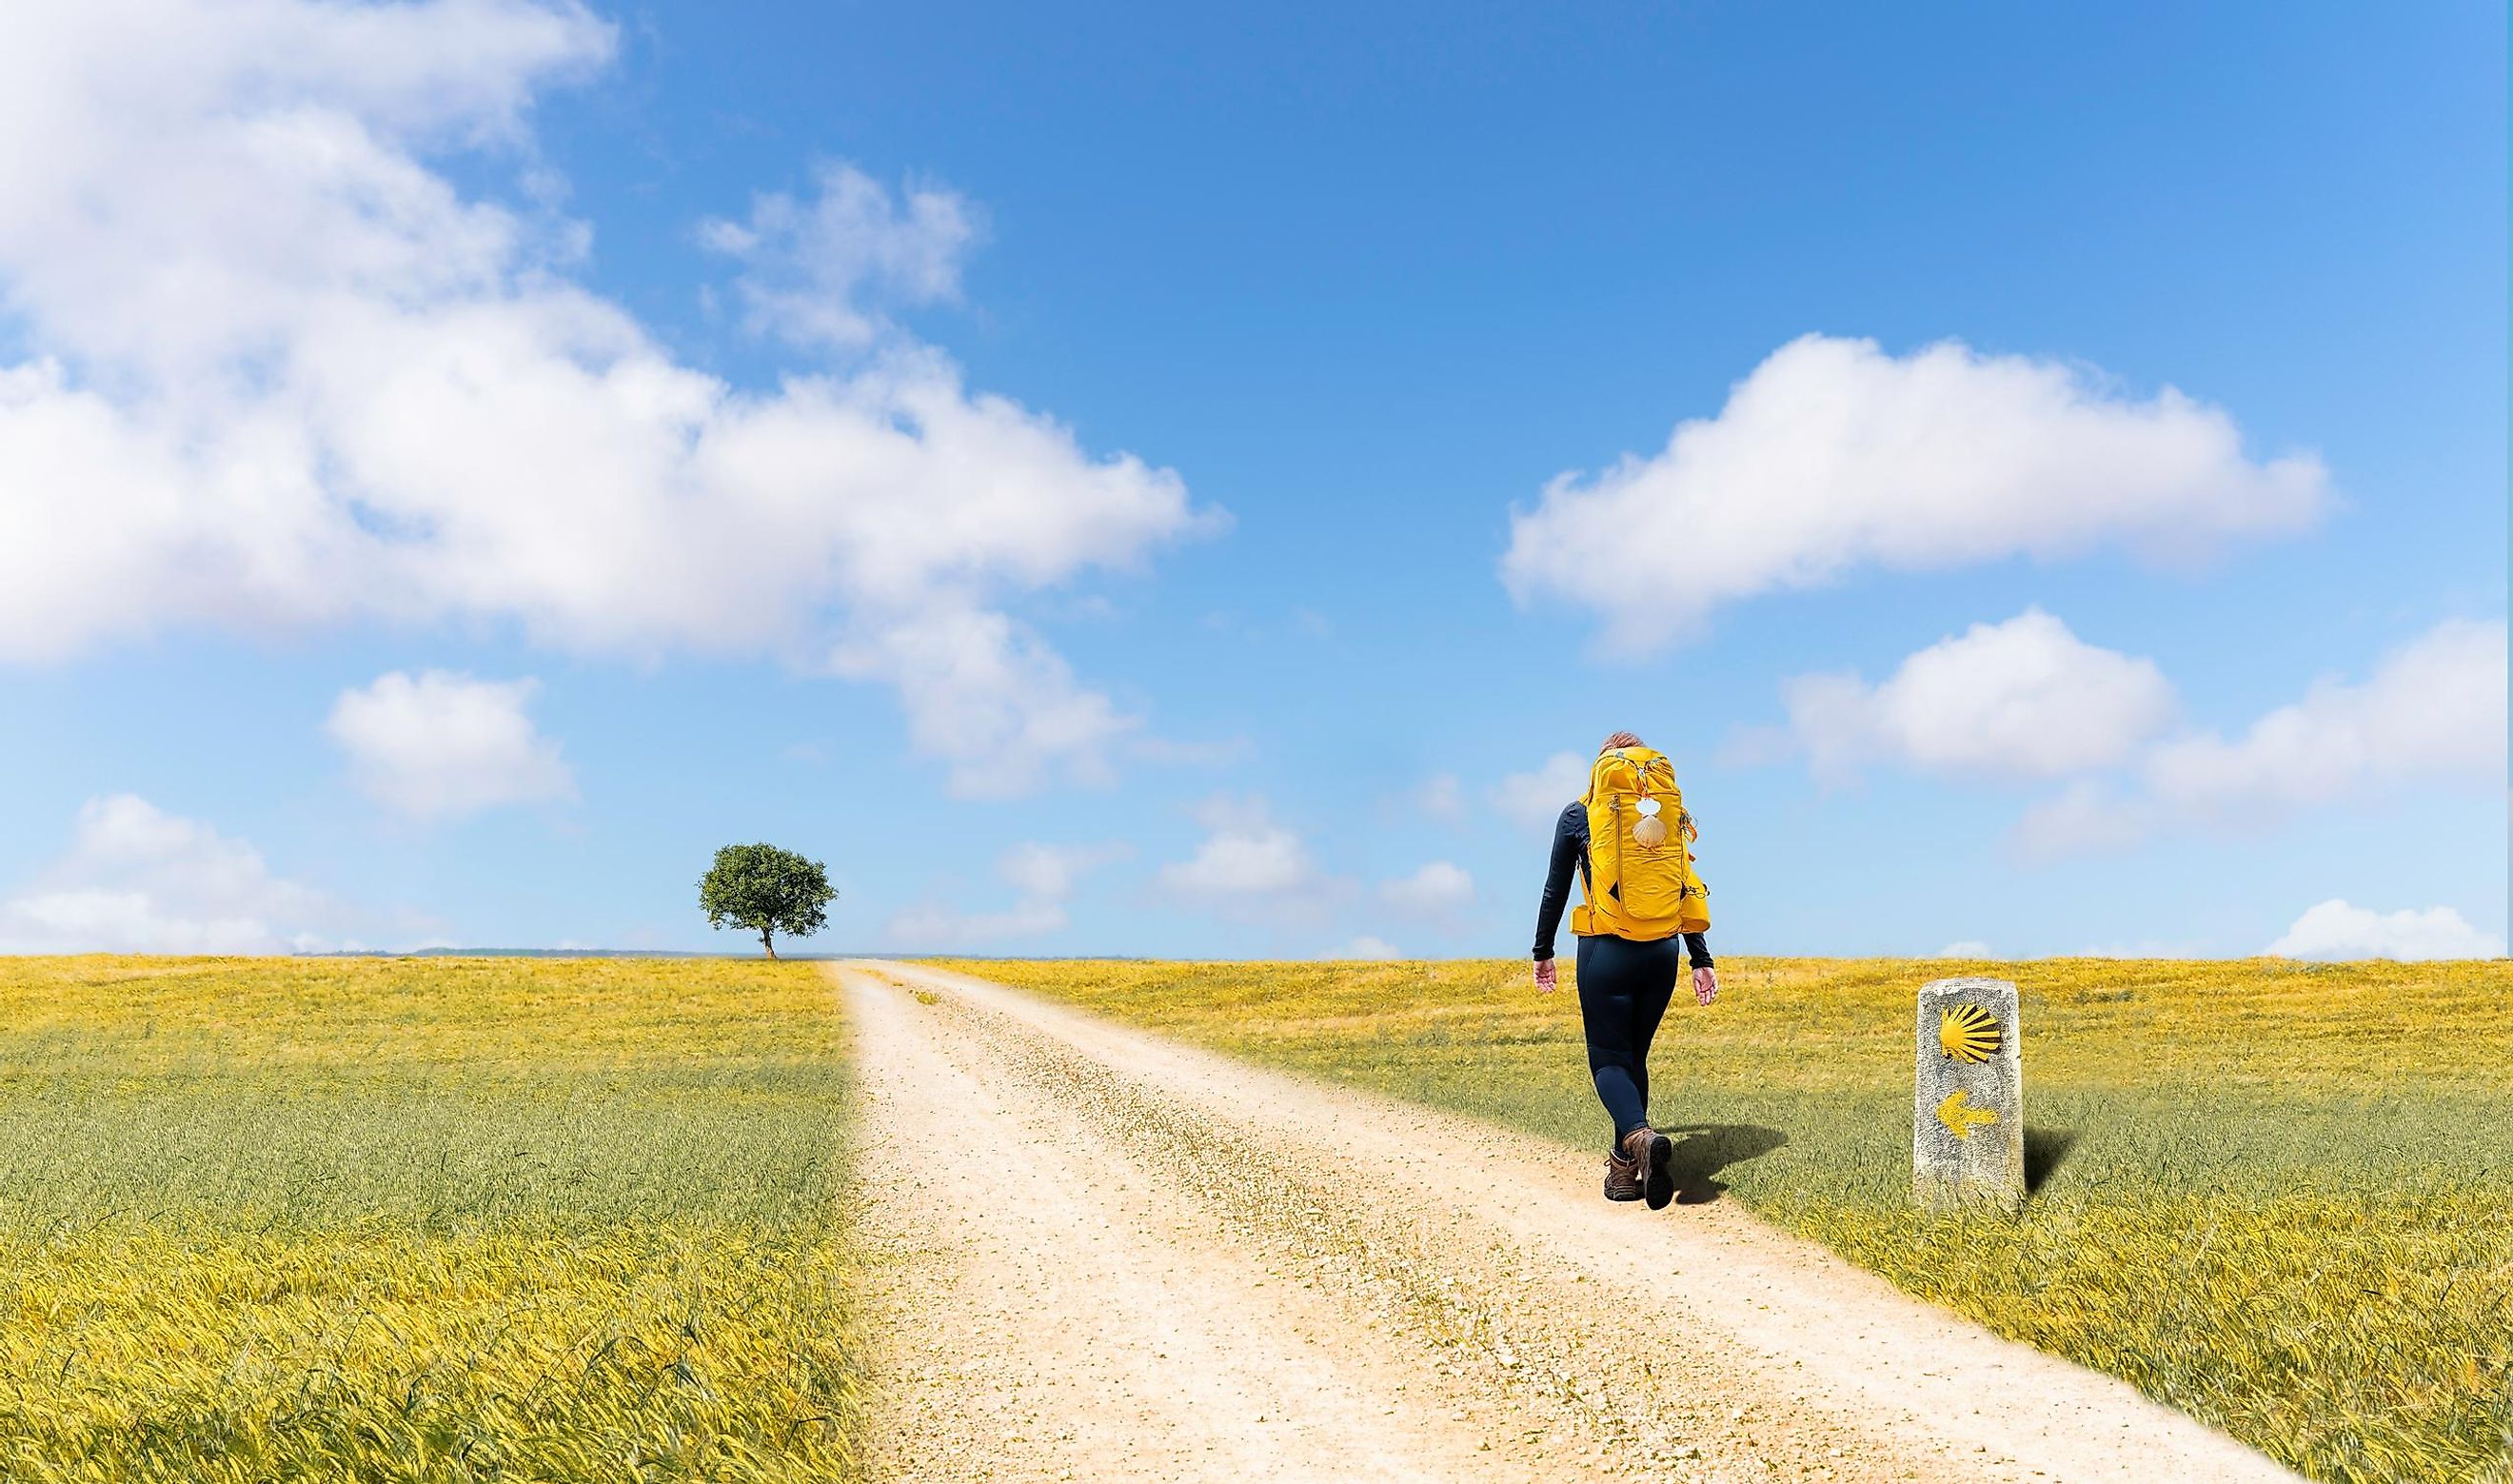 A backpacker strolls a long gravel road in the Spanish countryside. A stone pillar with a yellow seashell and arrow shows the way. The bright yellow/green grassy fields contrast the blue sky and white, fluffy clouds.